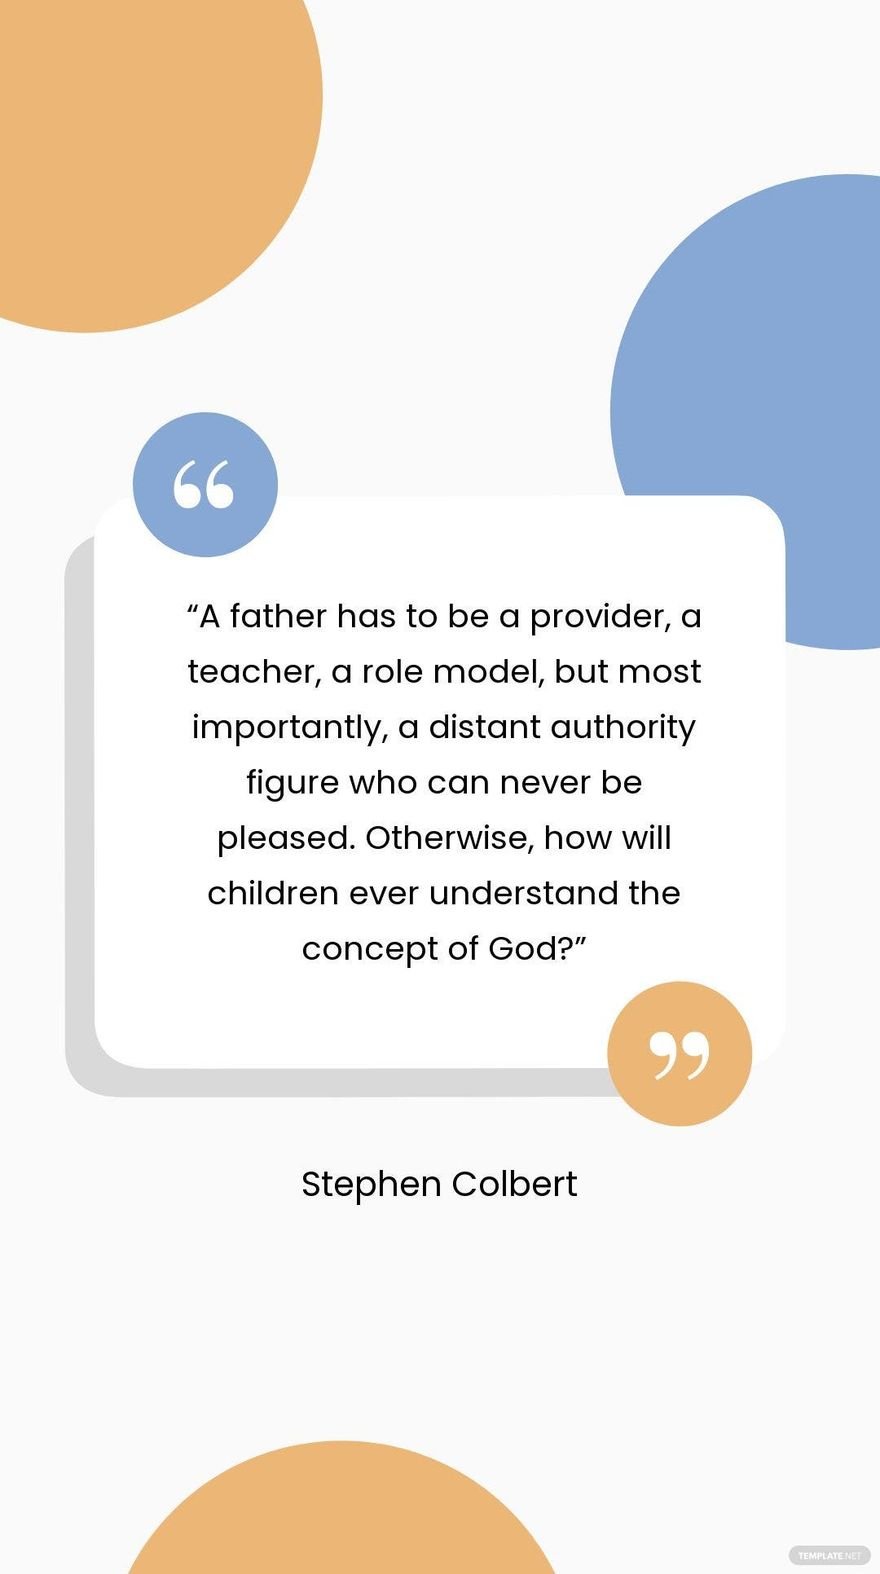  Stephen Colbert - A father has to be a provider, a teacher, a role model, but most importantly, a distant authority figure who can never be pleased. Otherwise, how will children ever understand the c